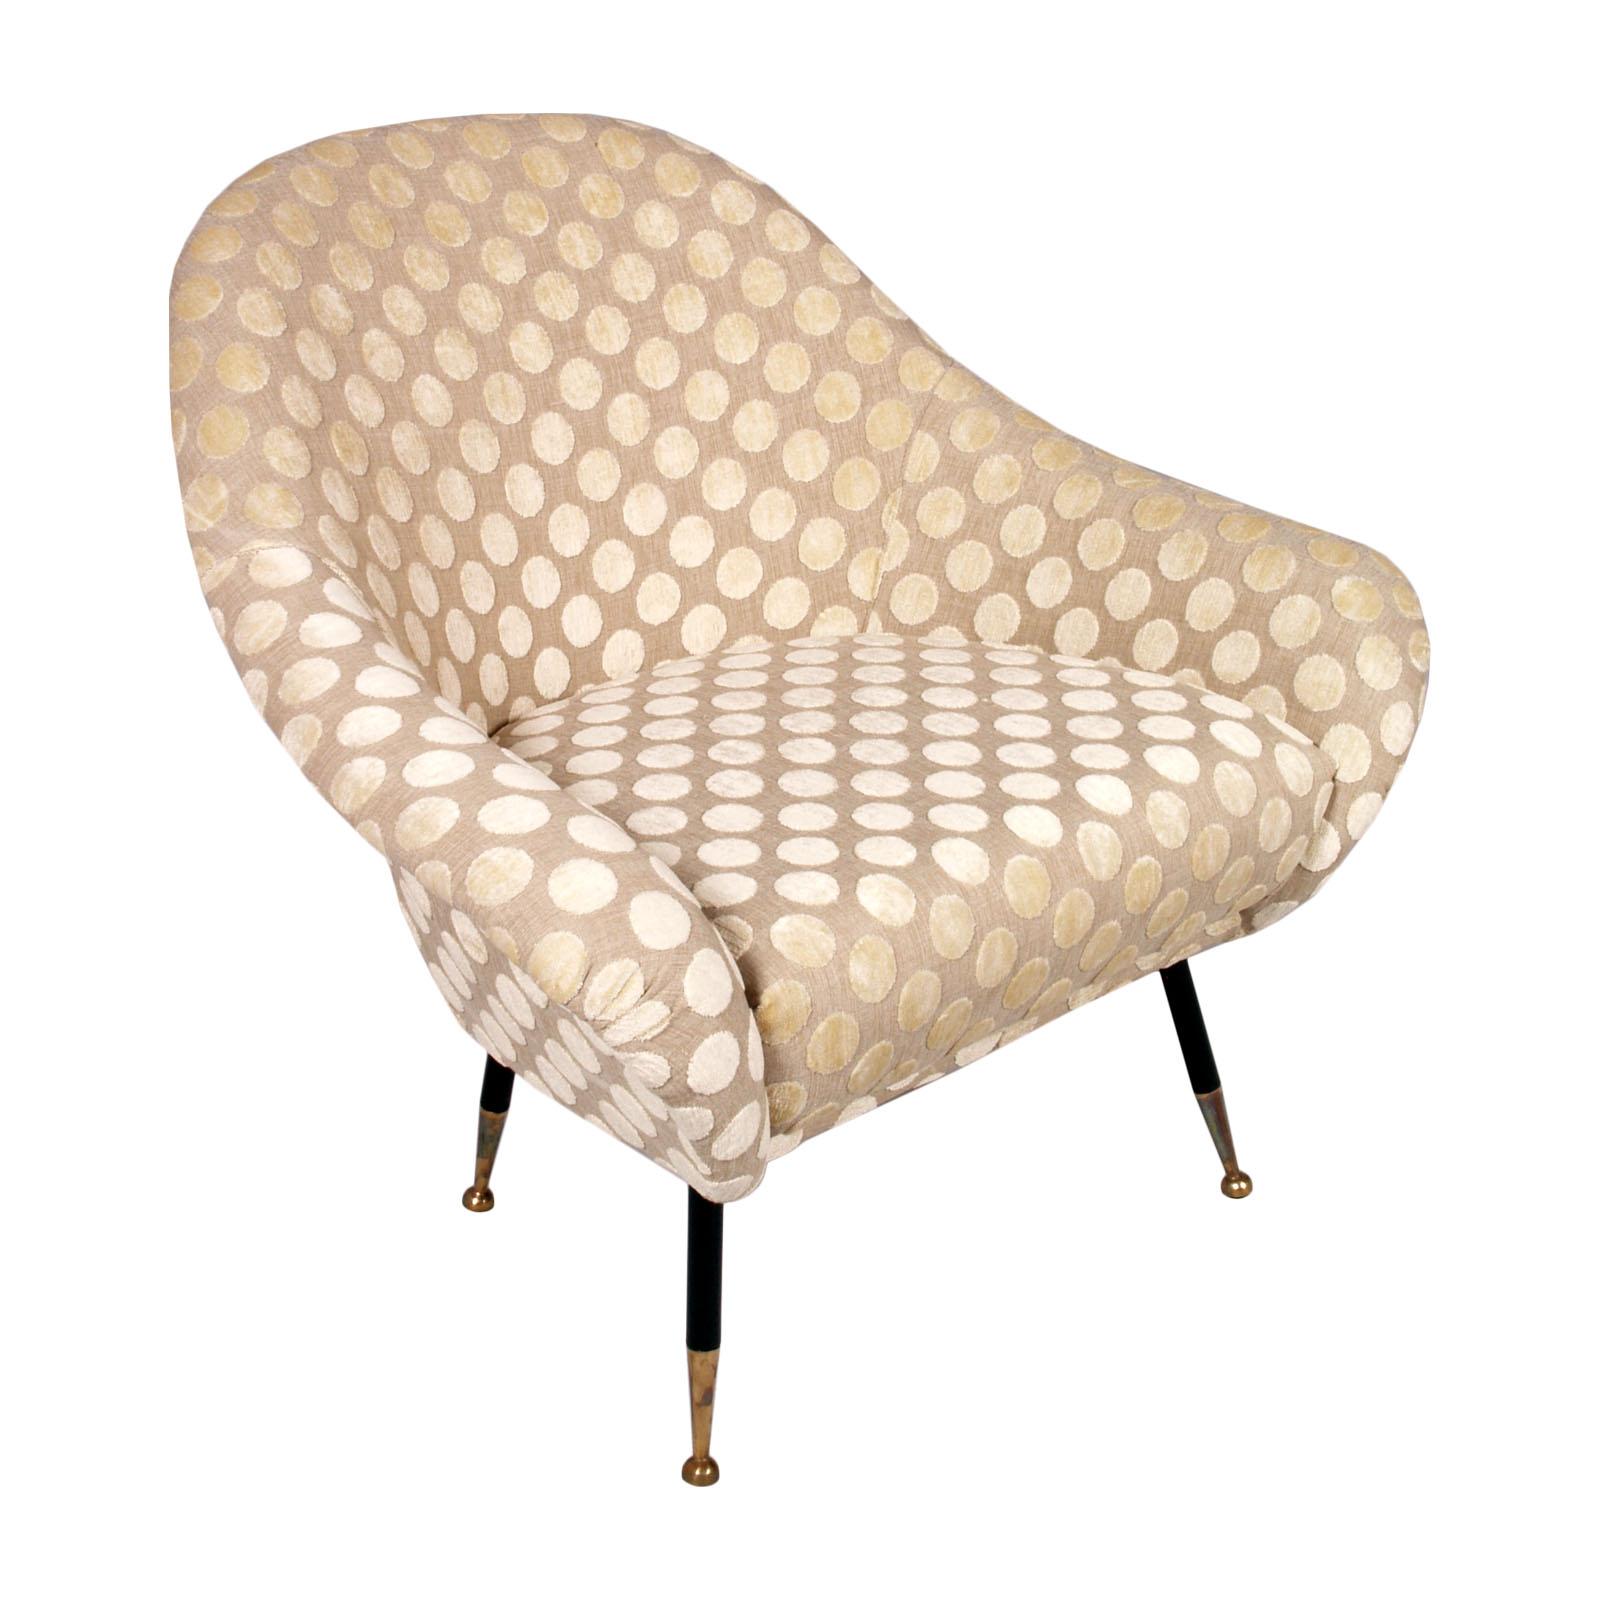 Midcentury lounge chairs, Gio Ponti designer attributed, just richly new upholstered.
Golden brass legs. This is an icon of the armchairs recognized all over the world for its elegance and comfort. We have restored it and upholstered it again with